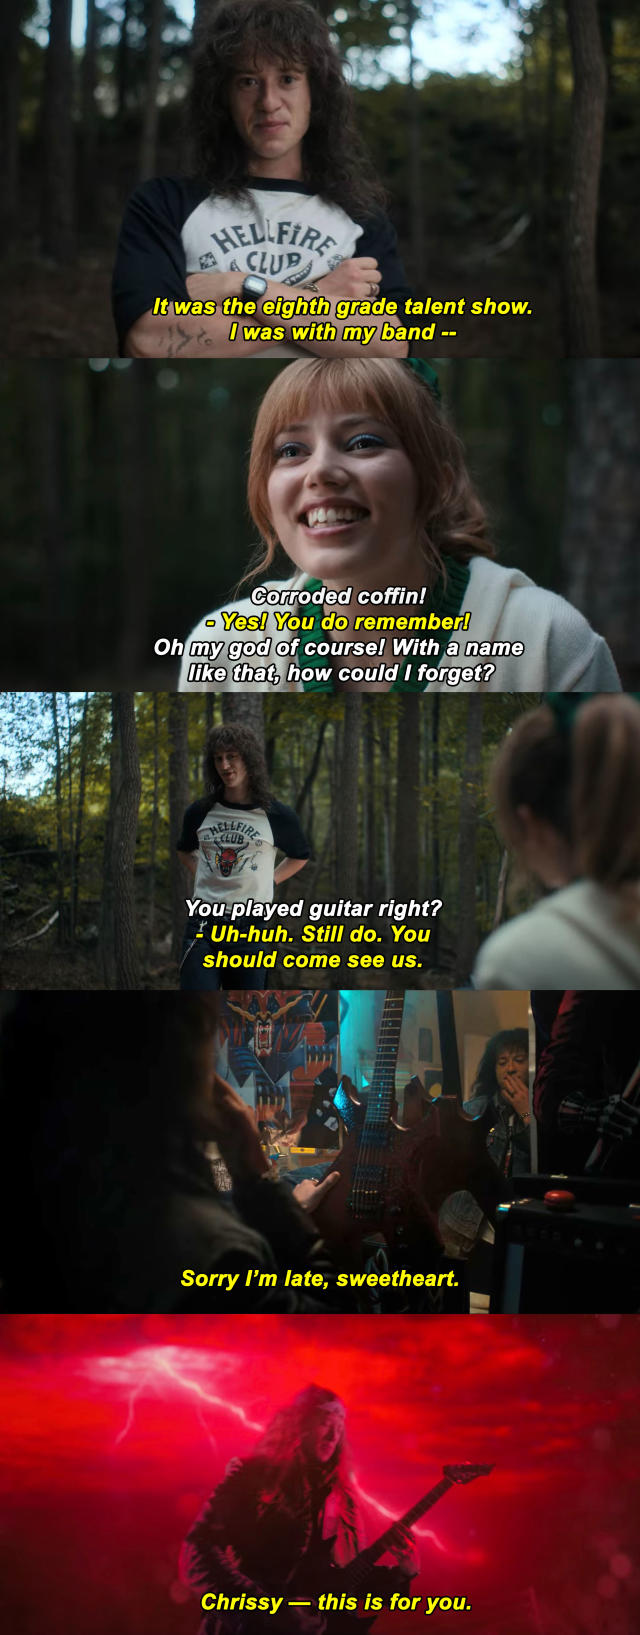 Omg it was *really* Eddie playing that guitar solo in Stranger Things